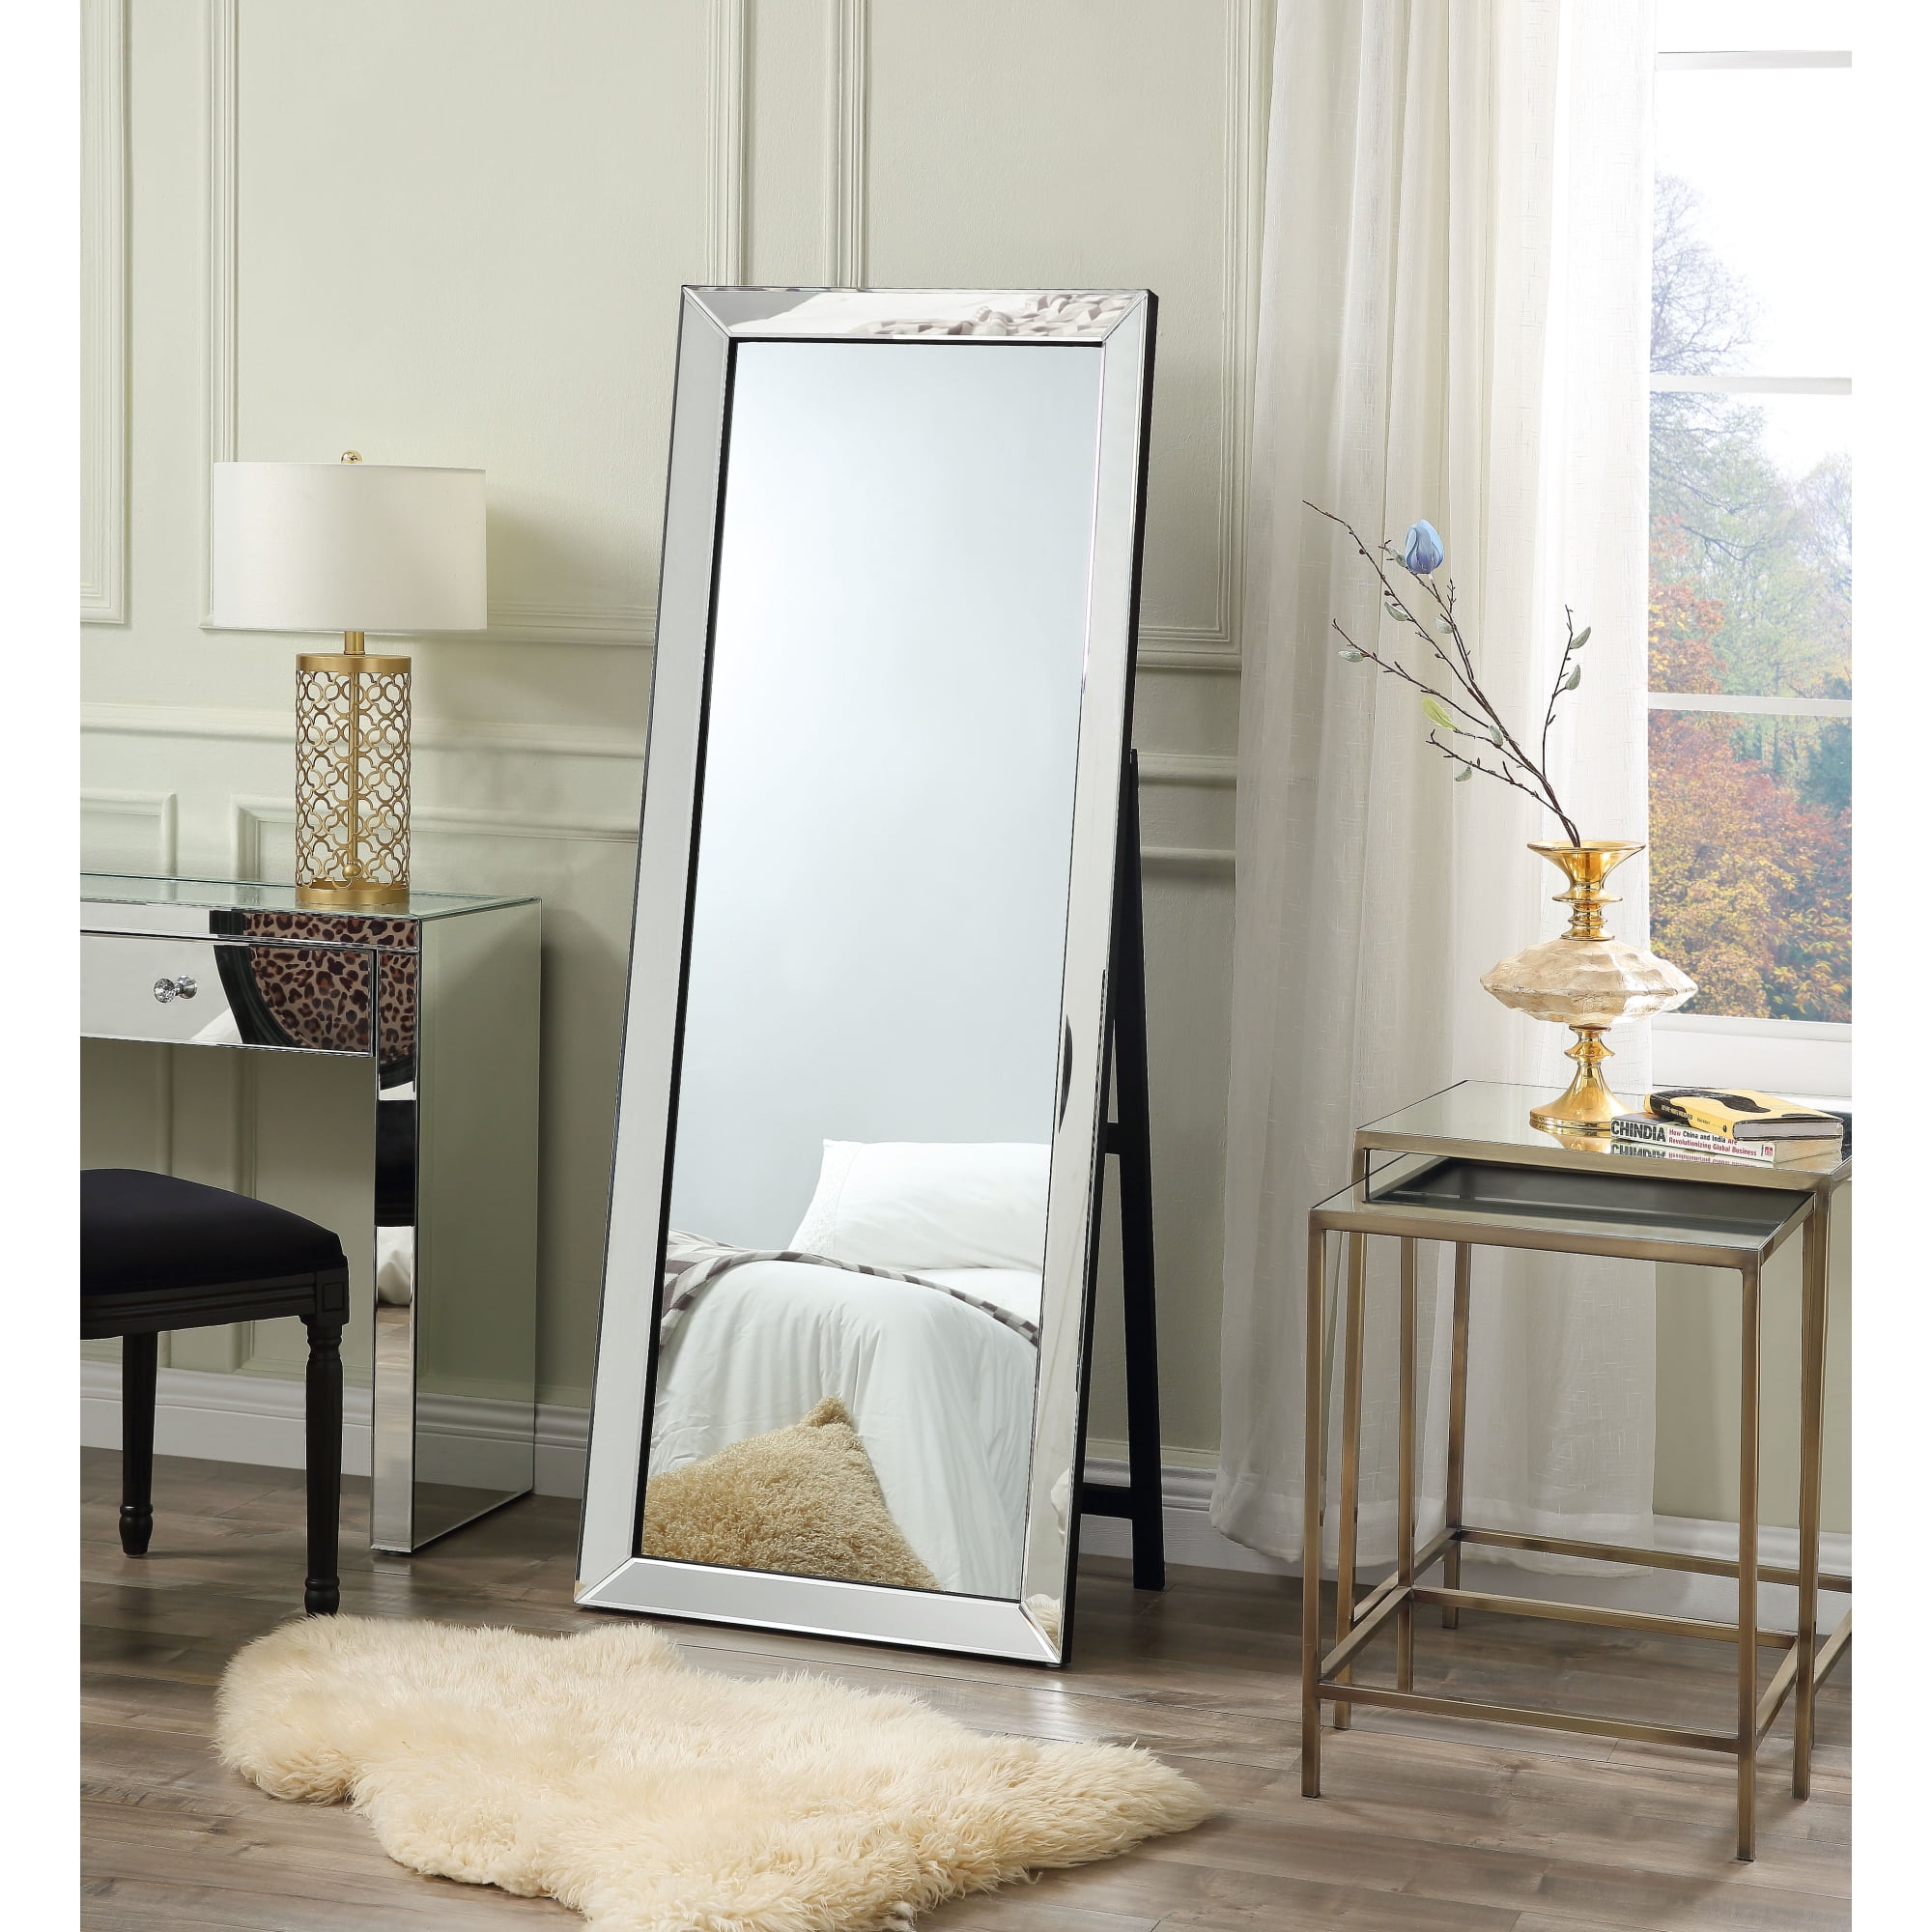 Inspired Home Dara Full Length Mirror, Long Mirror For Bedroom With Stand